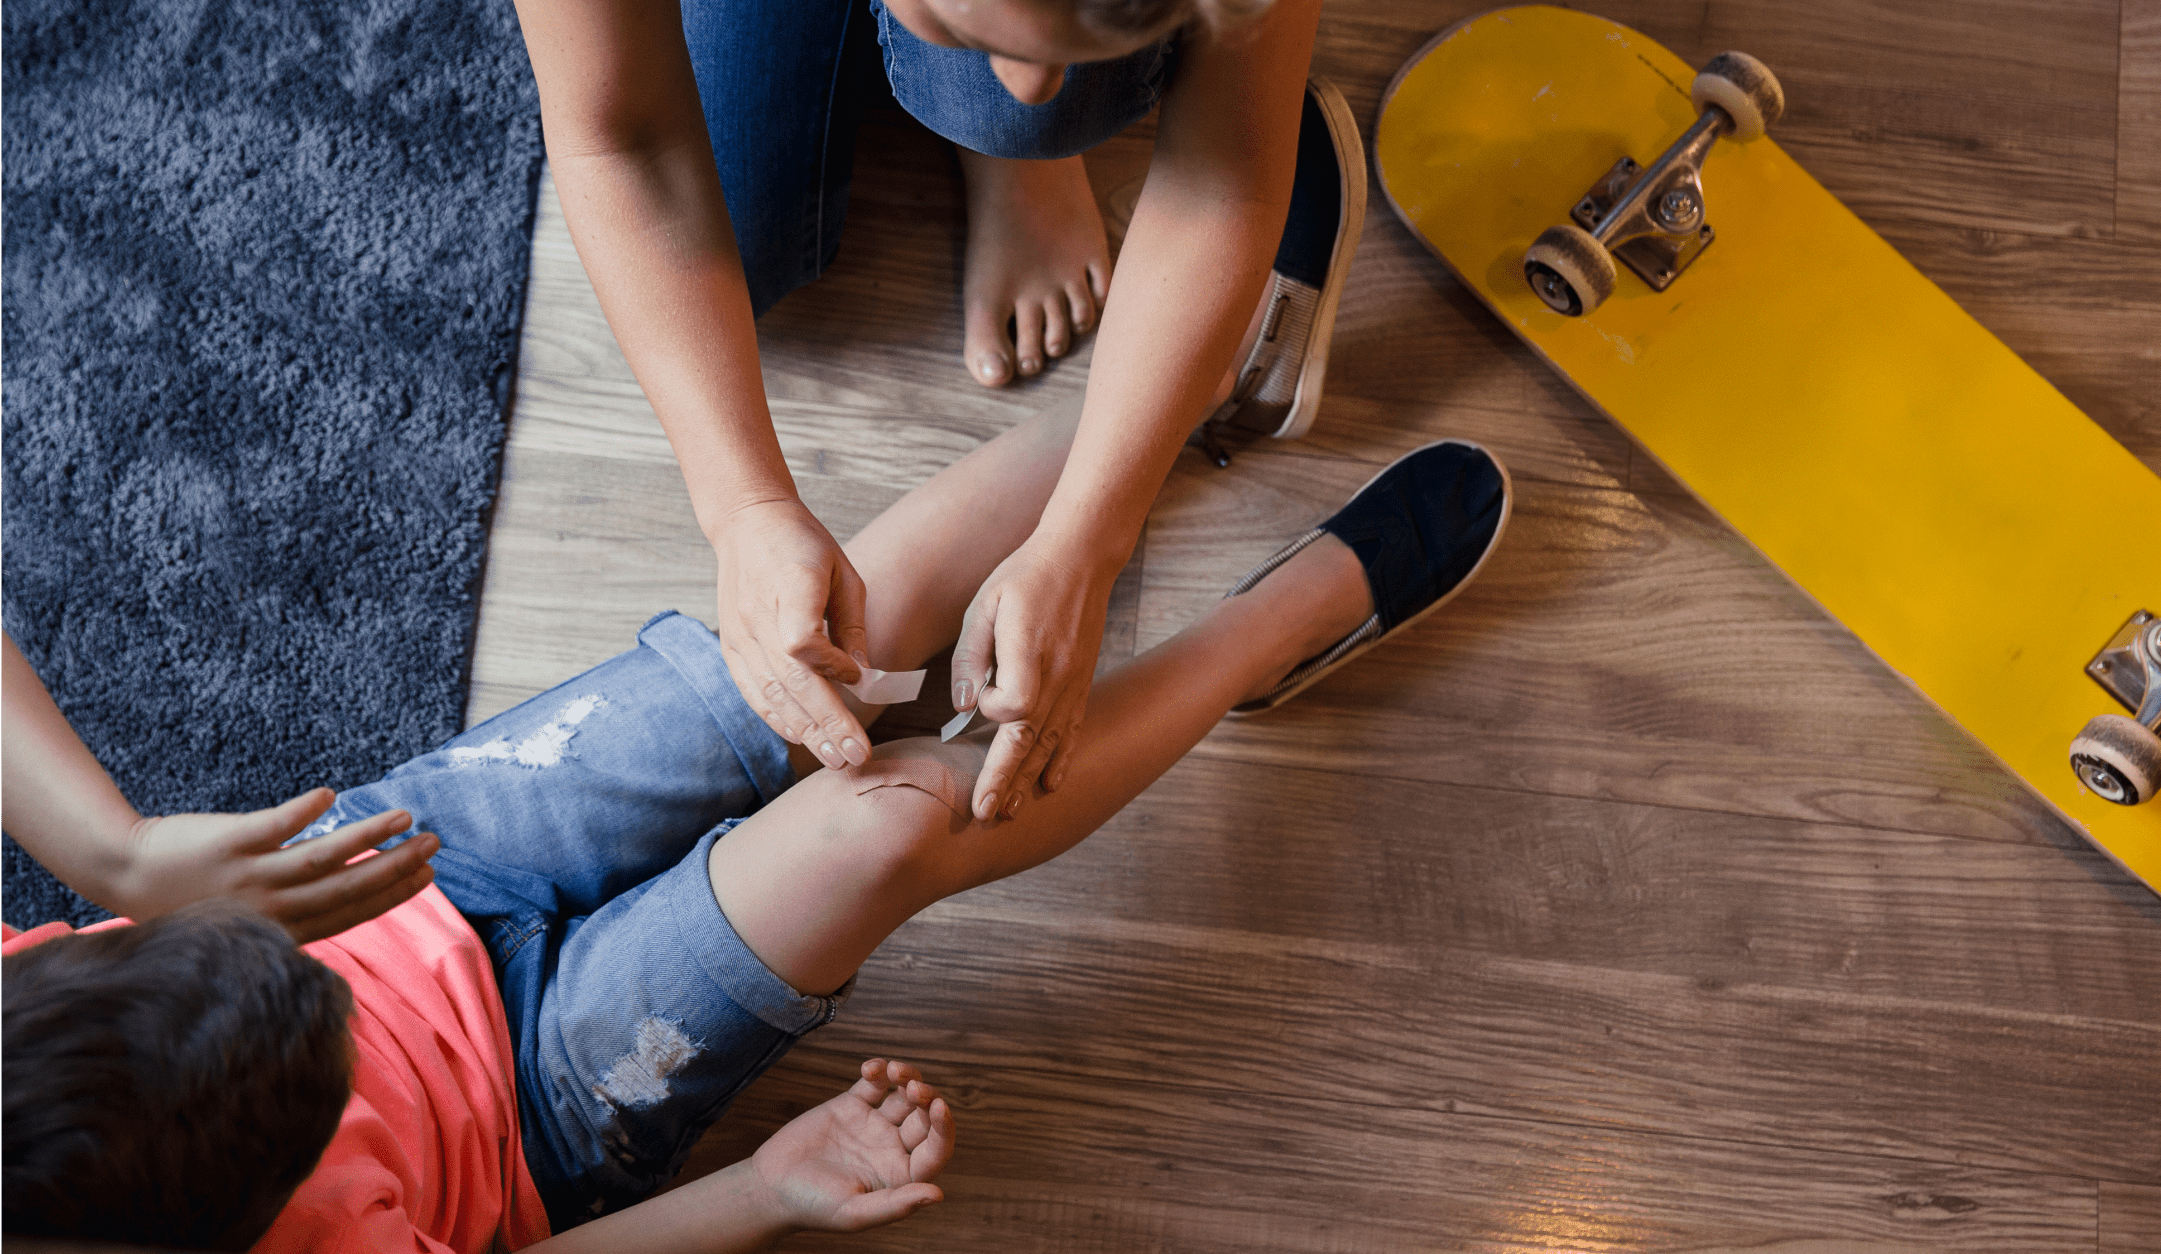 Person placing a bandage on a scrape on young child’s knee